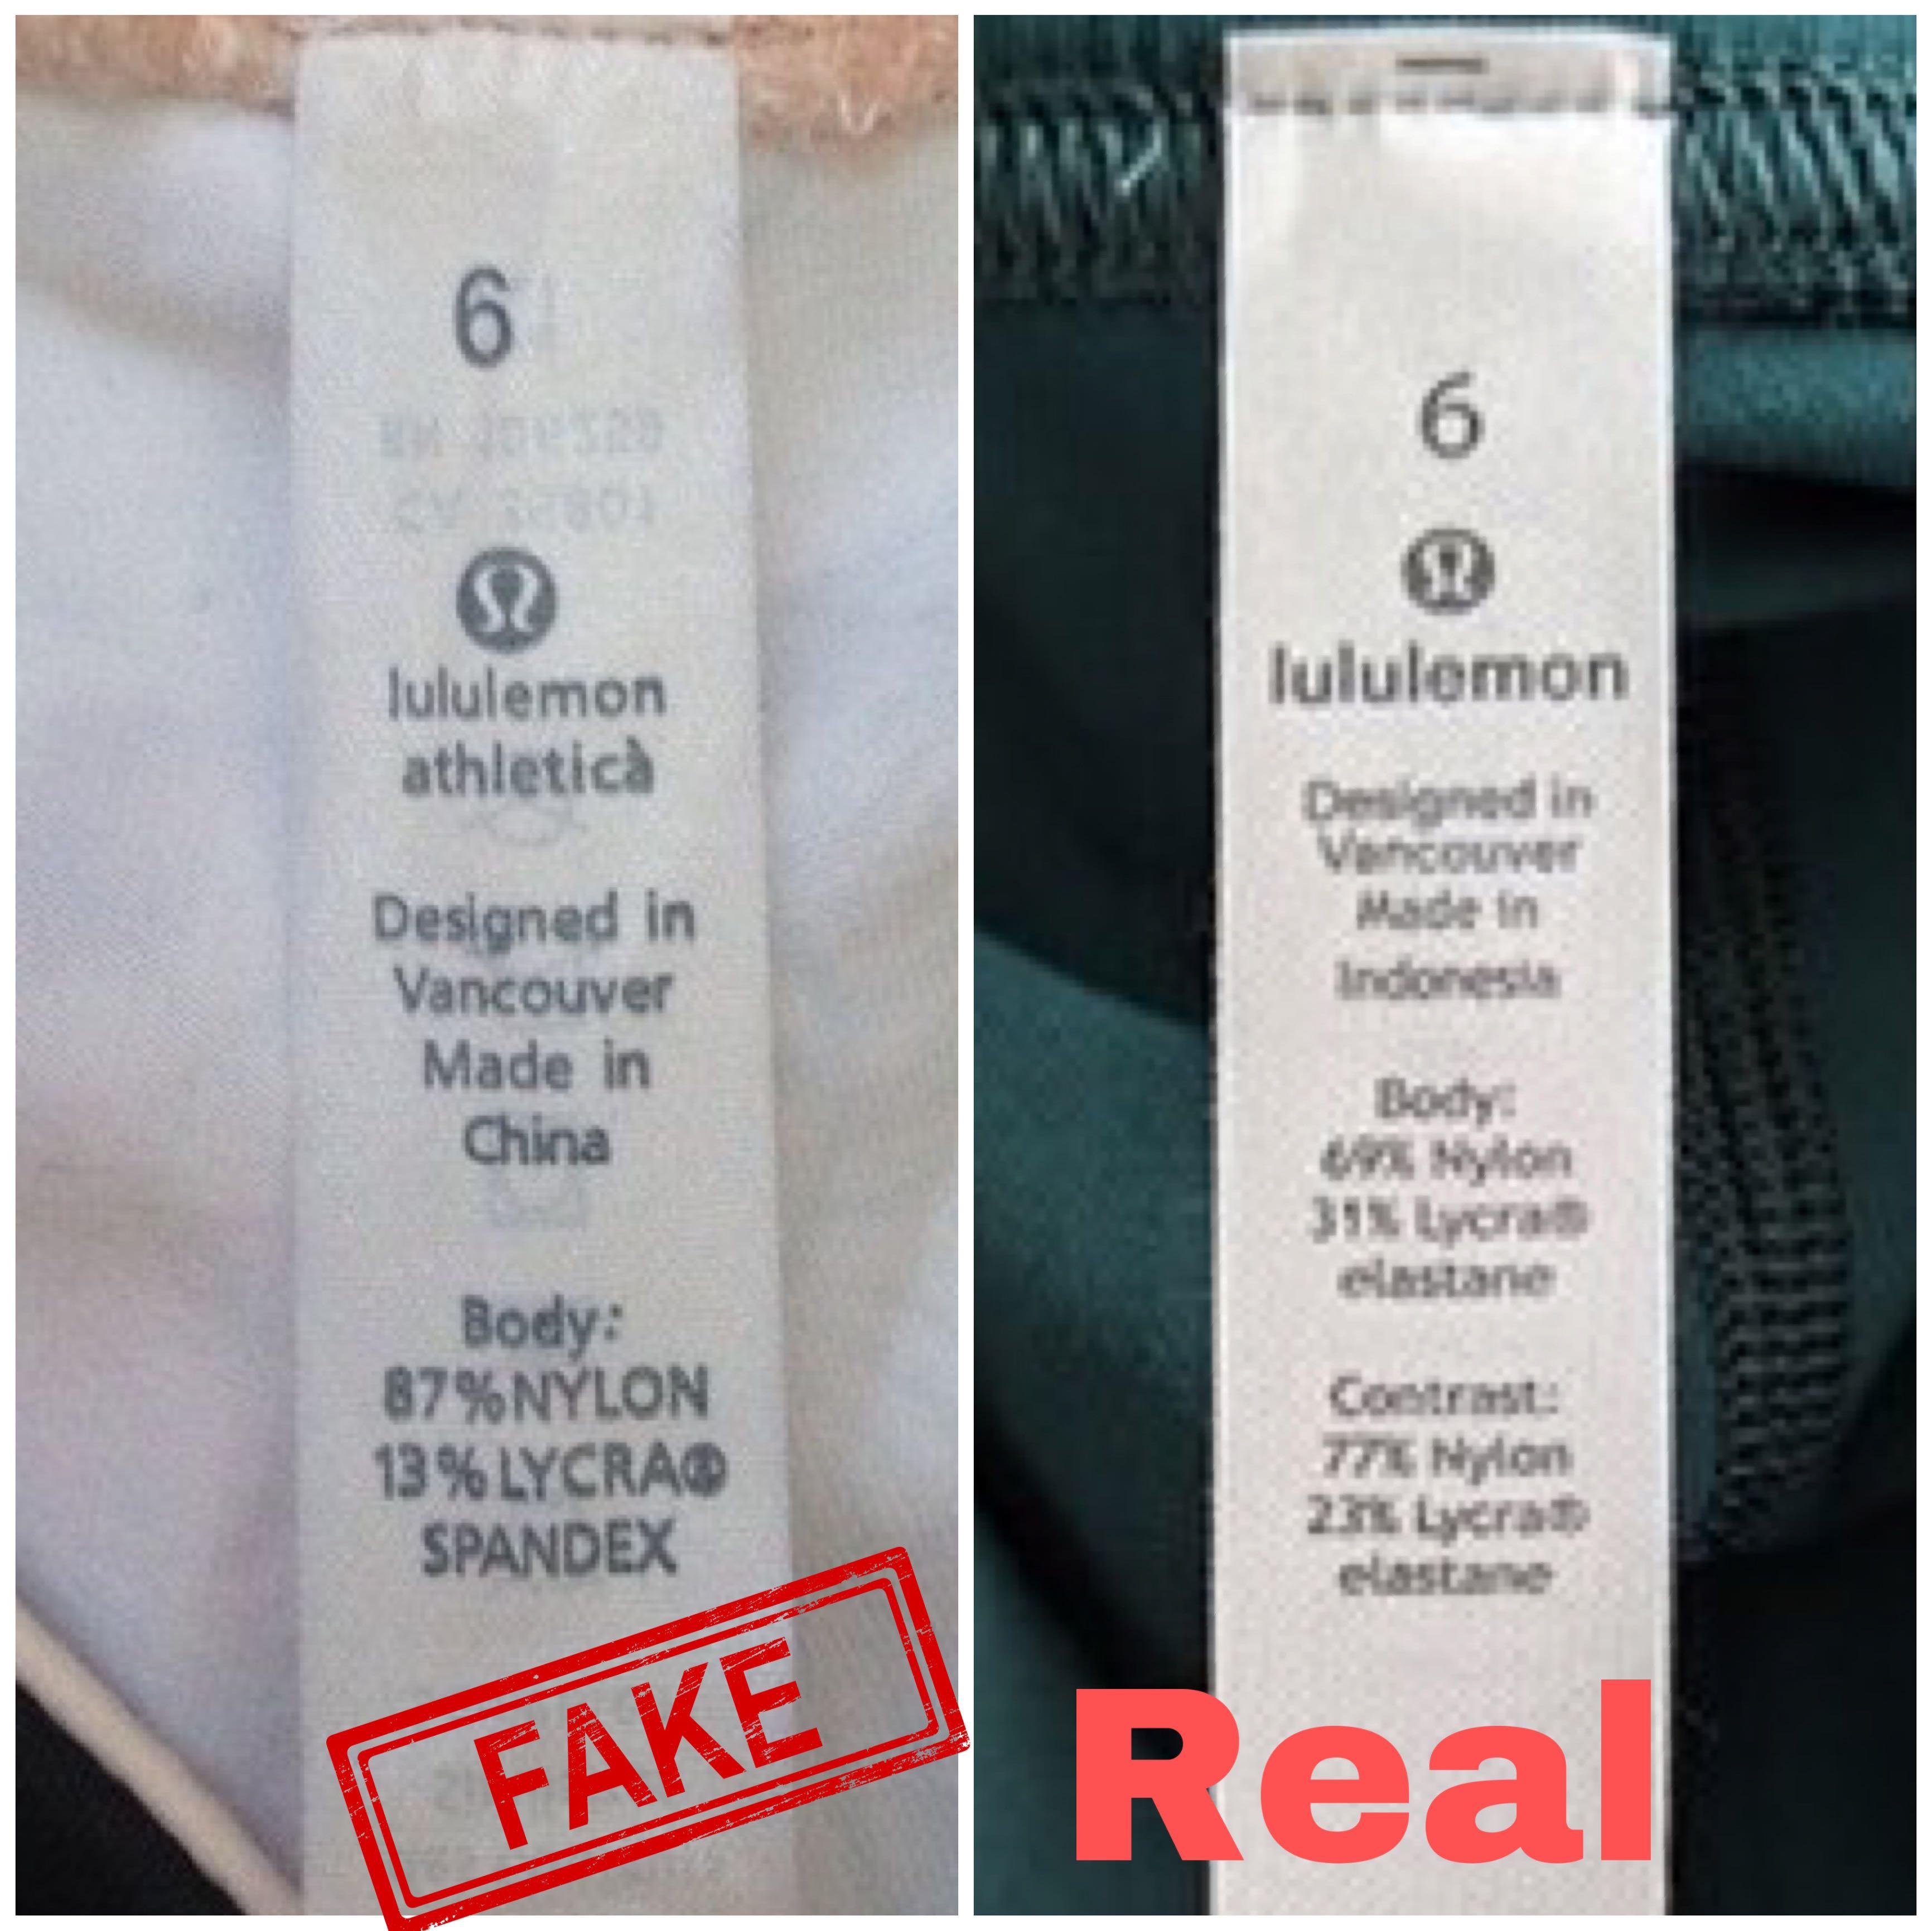 How to spot fake Lululemon tights, Men's Fashion, Activewear on Carousell